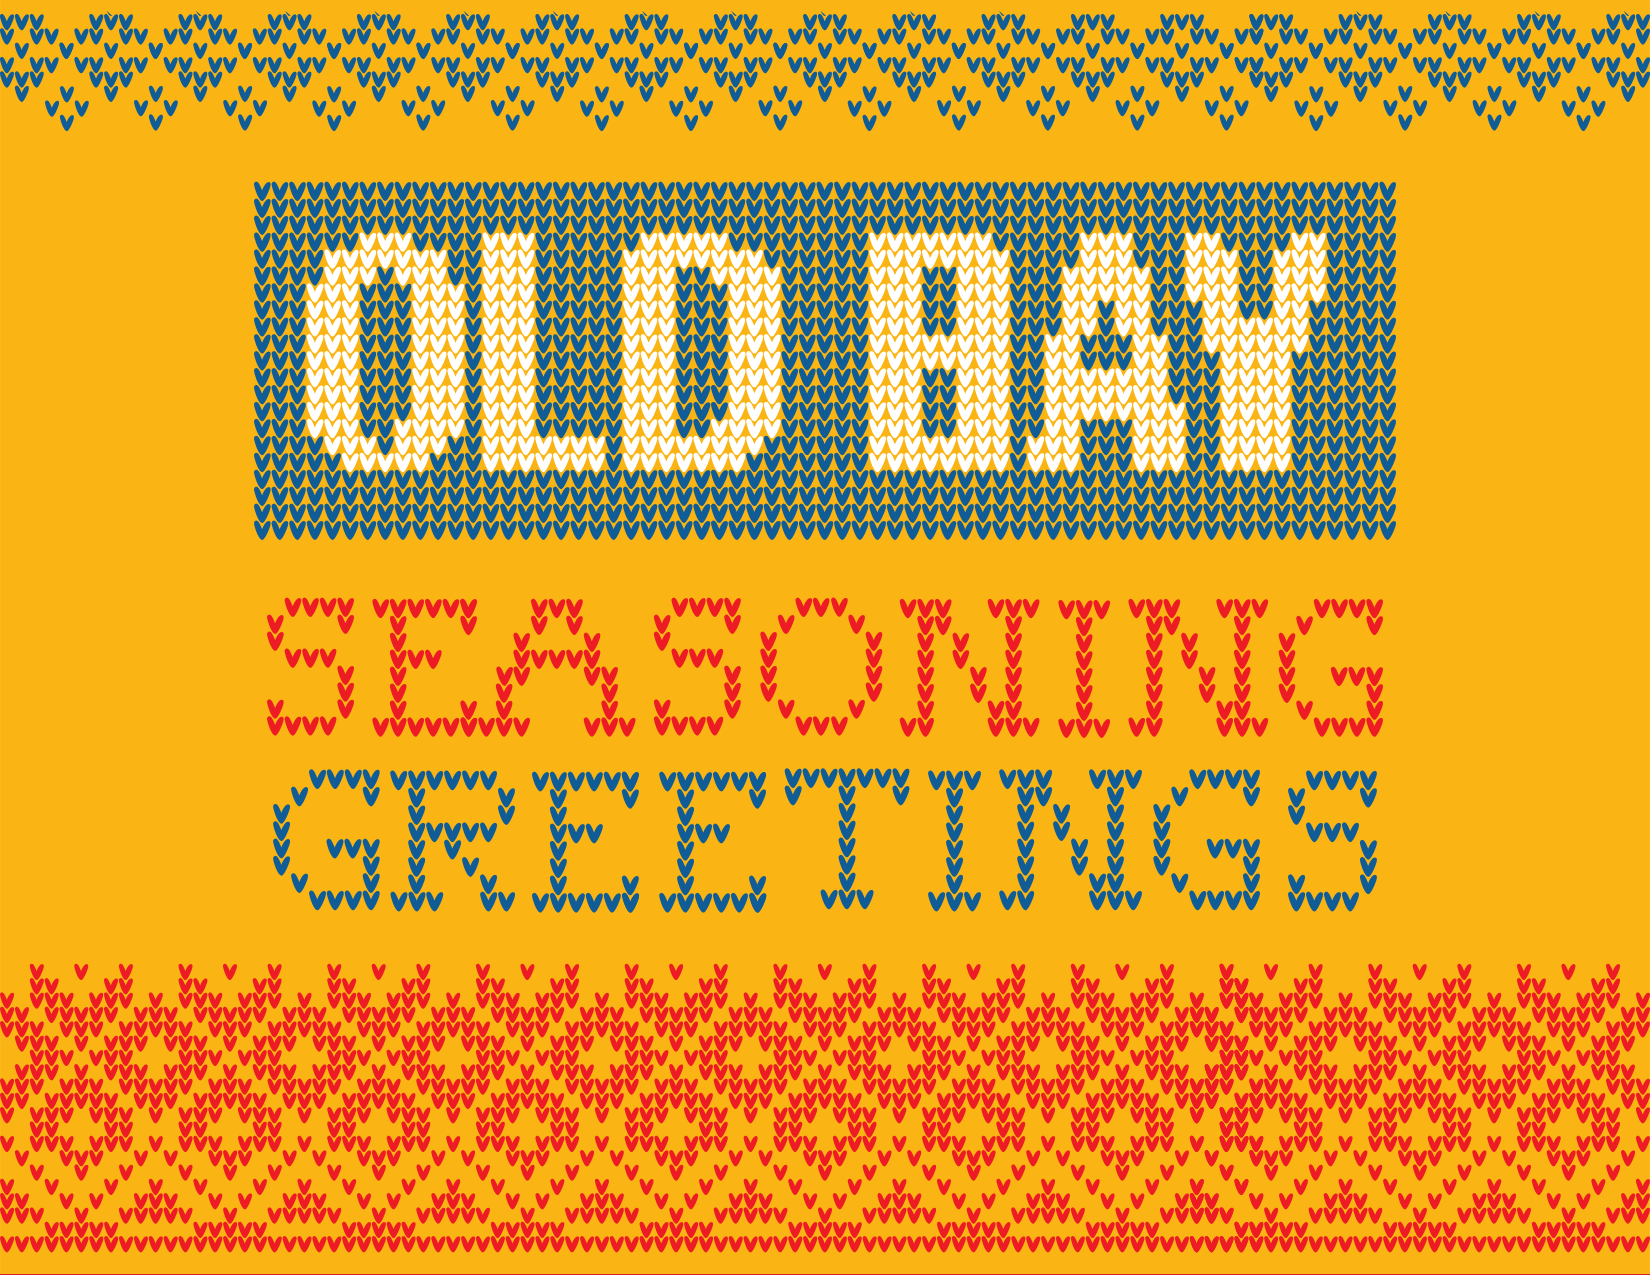 Seasoning Greetings (Gold) / 8-Pack Christmas Cards - Route One Apparel